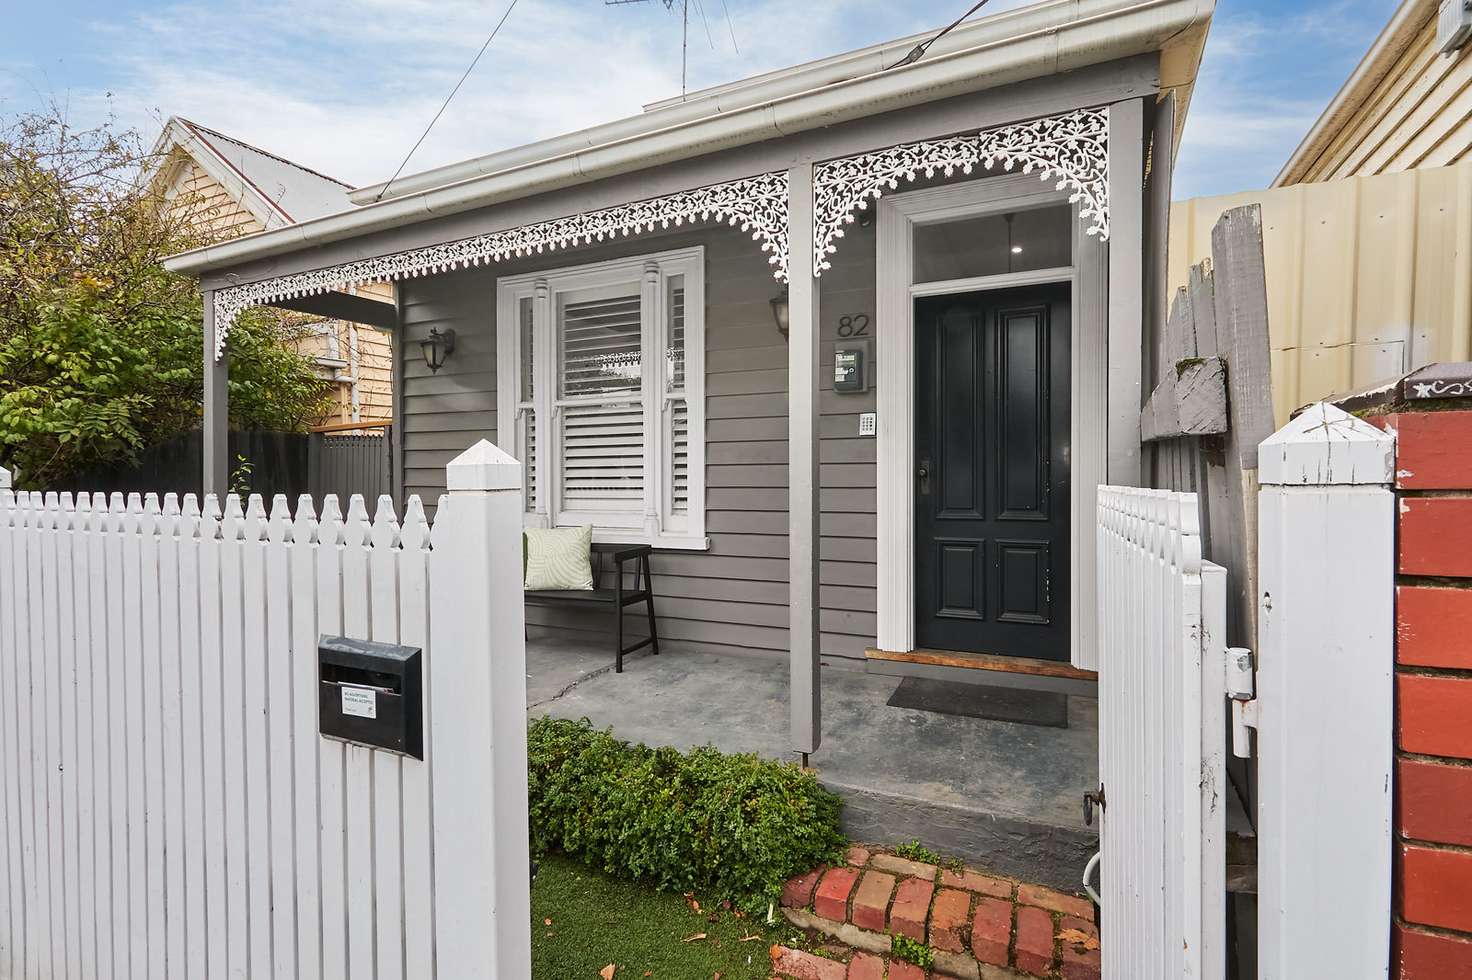 Main view of Homely house listing, 82 Egan Street, Richmond VIC 3121